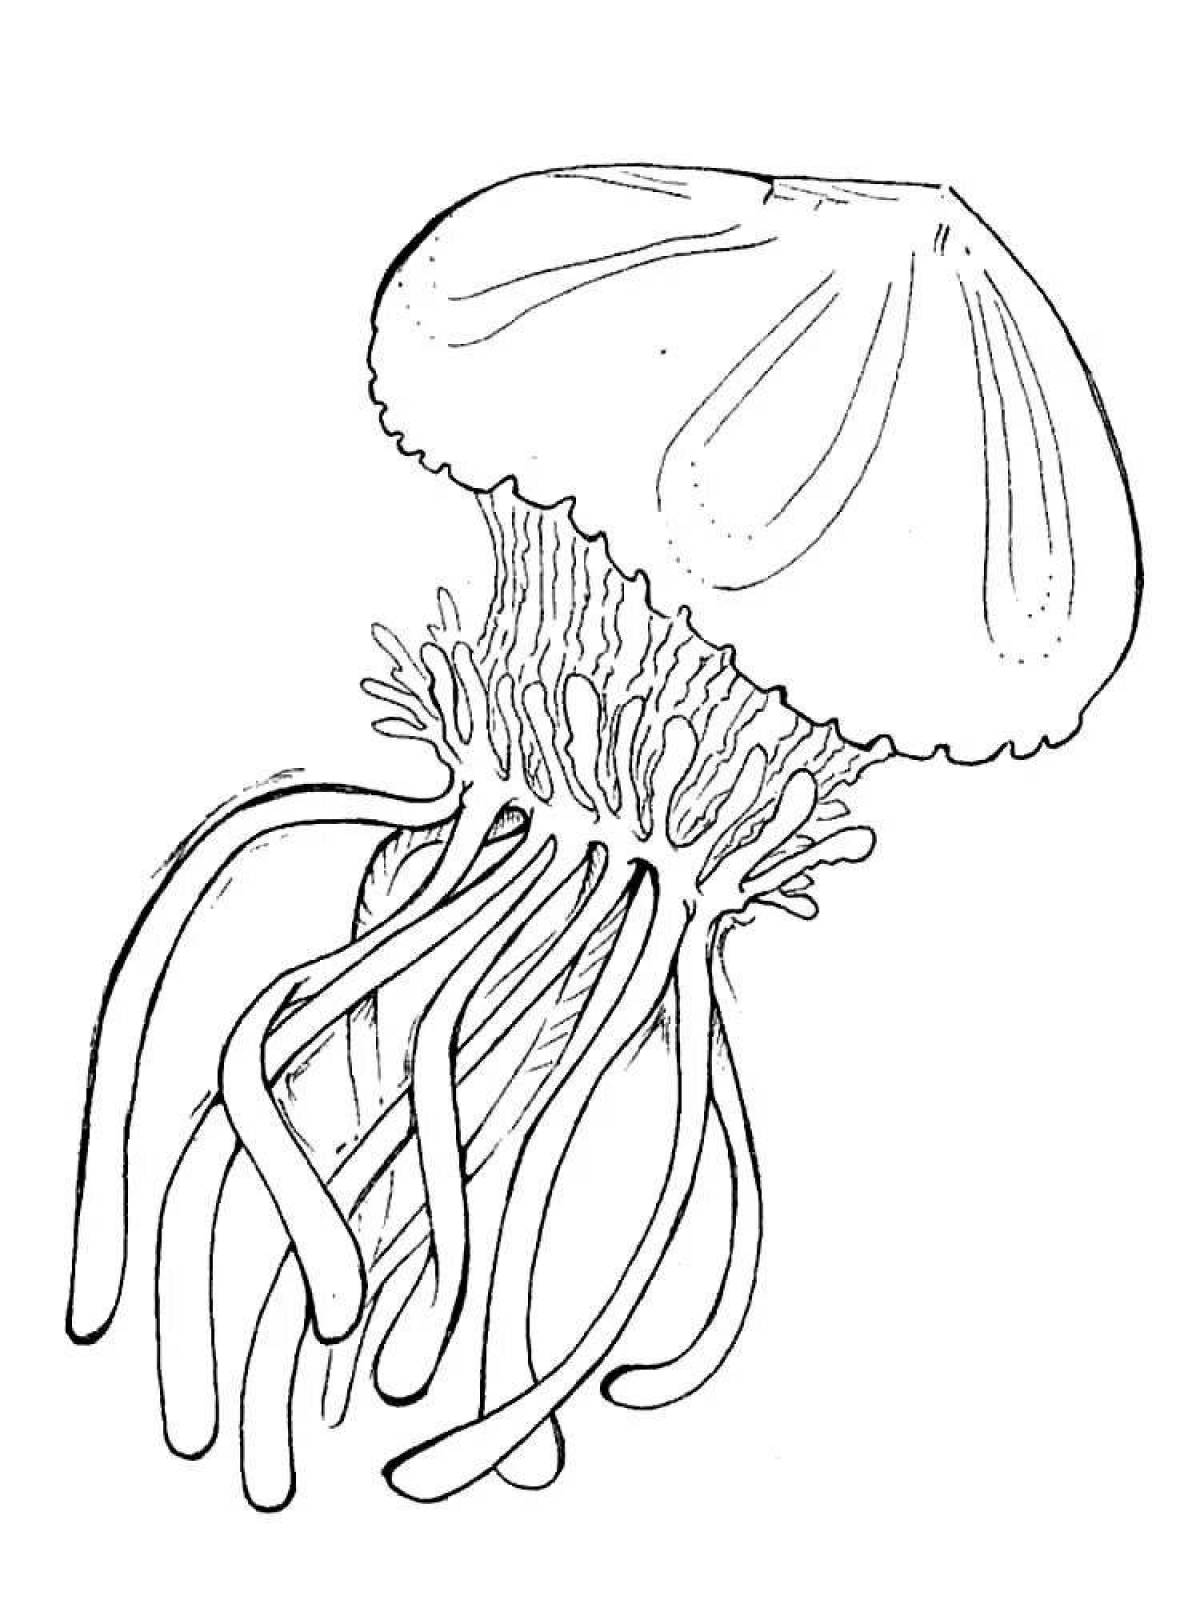 Amazing jellyfish coloring pages for kids